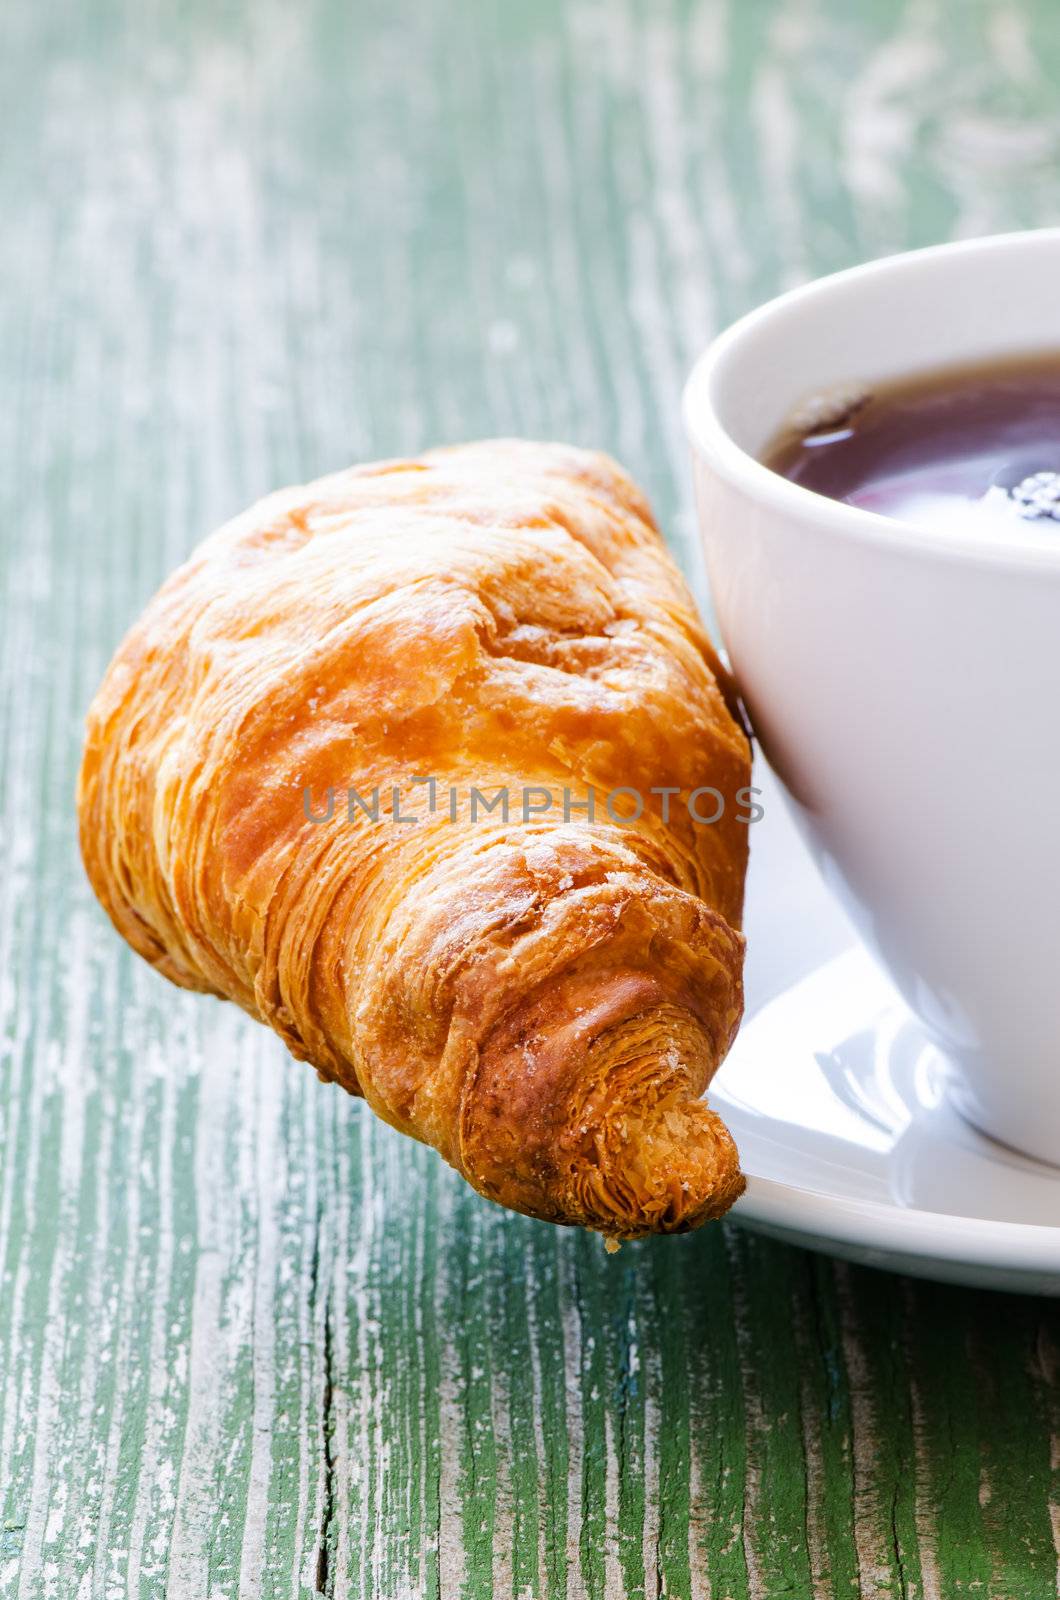 Cofee and croissant by Nanisimova